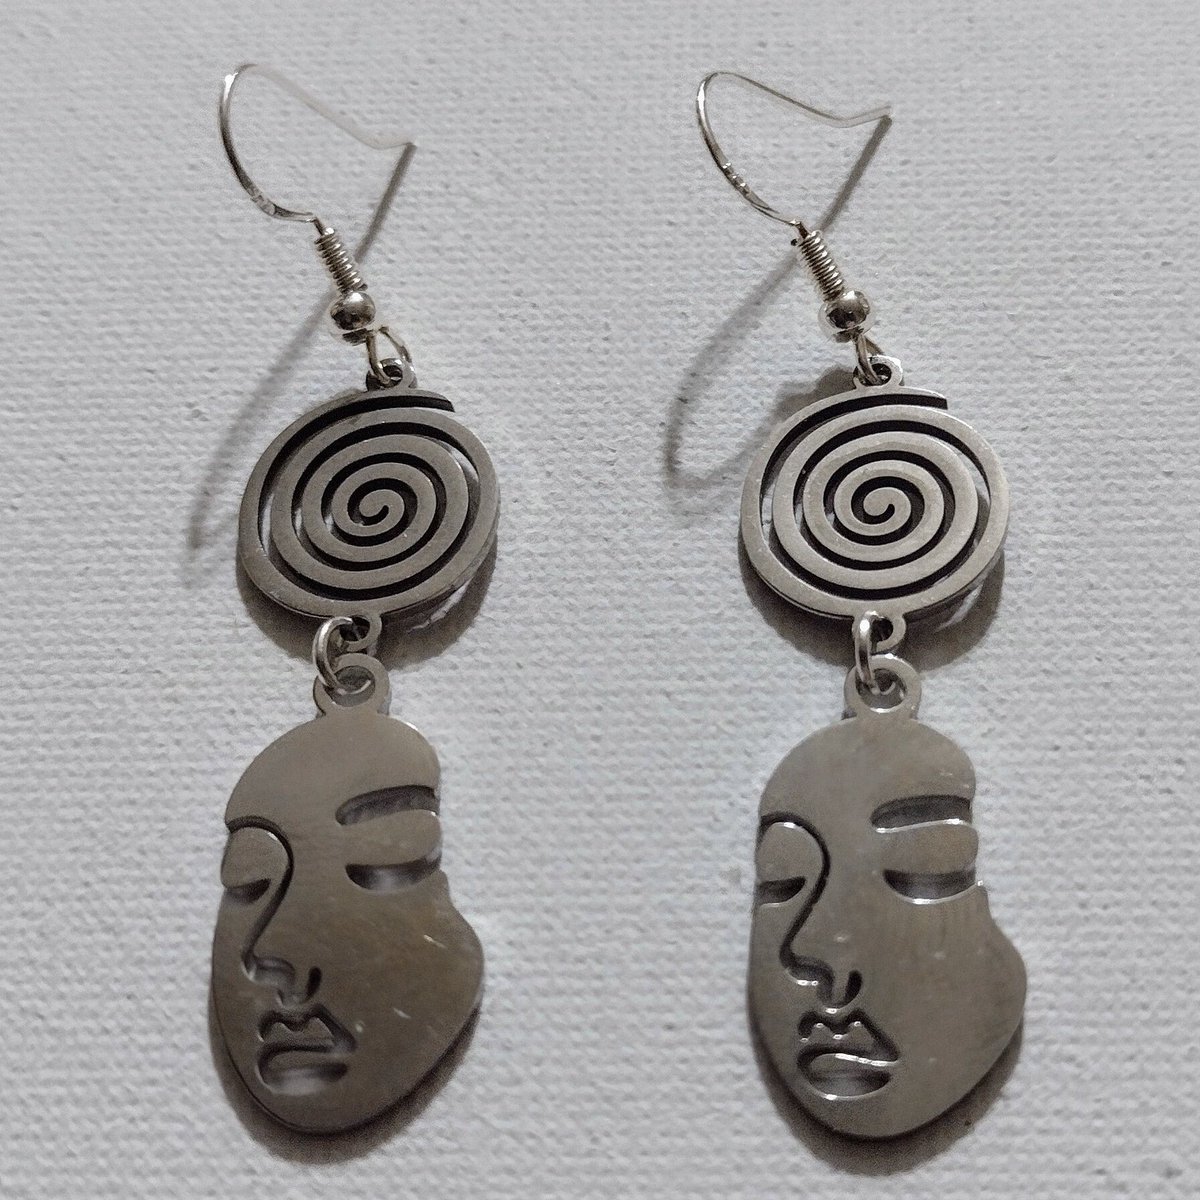 Swirly Twirly Whirly Handmade Silhouette Drop Earrings With Sterling Silver Earwires thatcraftyfella.etsy.com/listing/171674… #handmadeearrings #earrings #handmadejewelry #handmade #earringsoftheday #jewelry #statementearrings #Mhhsbd #handmadewithlove #craftbizparty #smallbusiness #Shopsmall